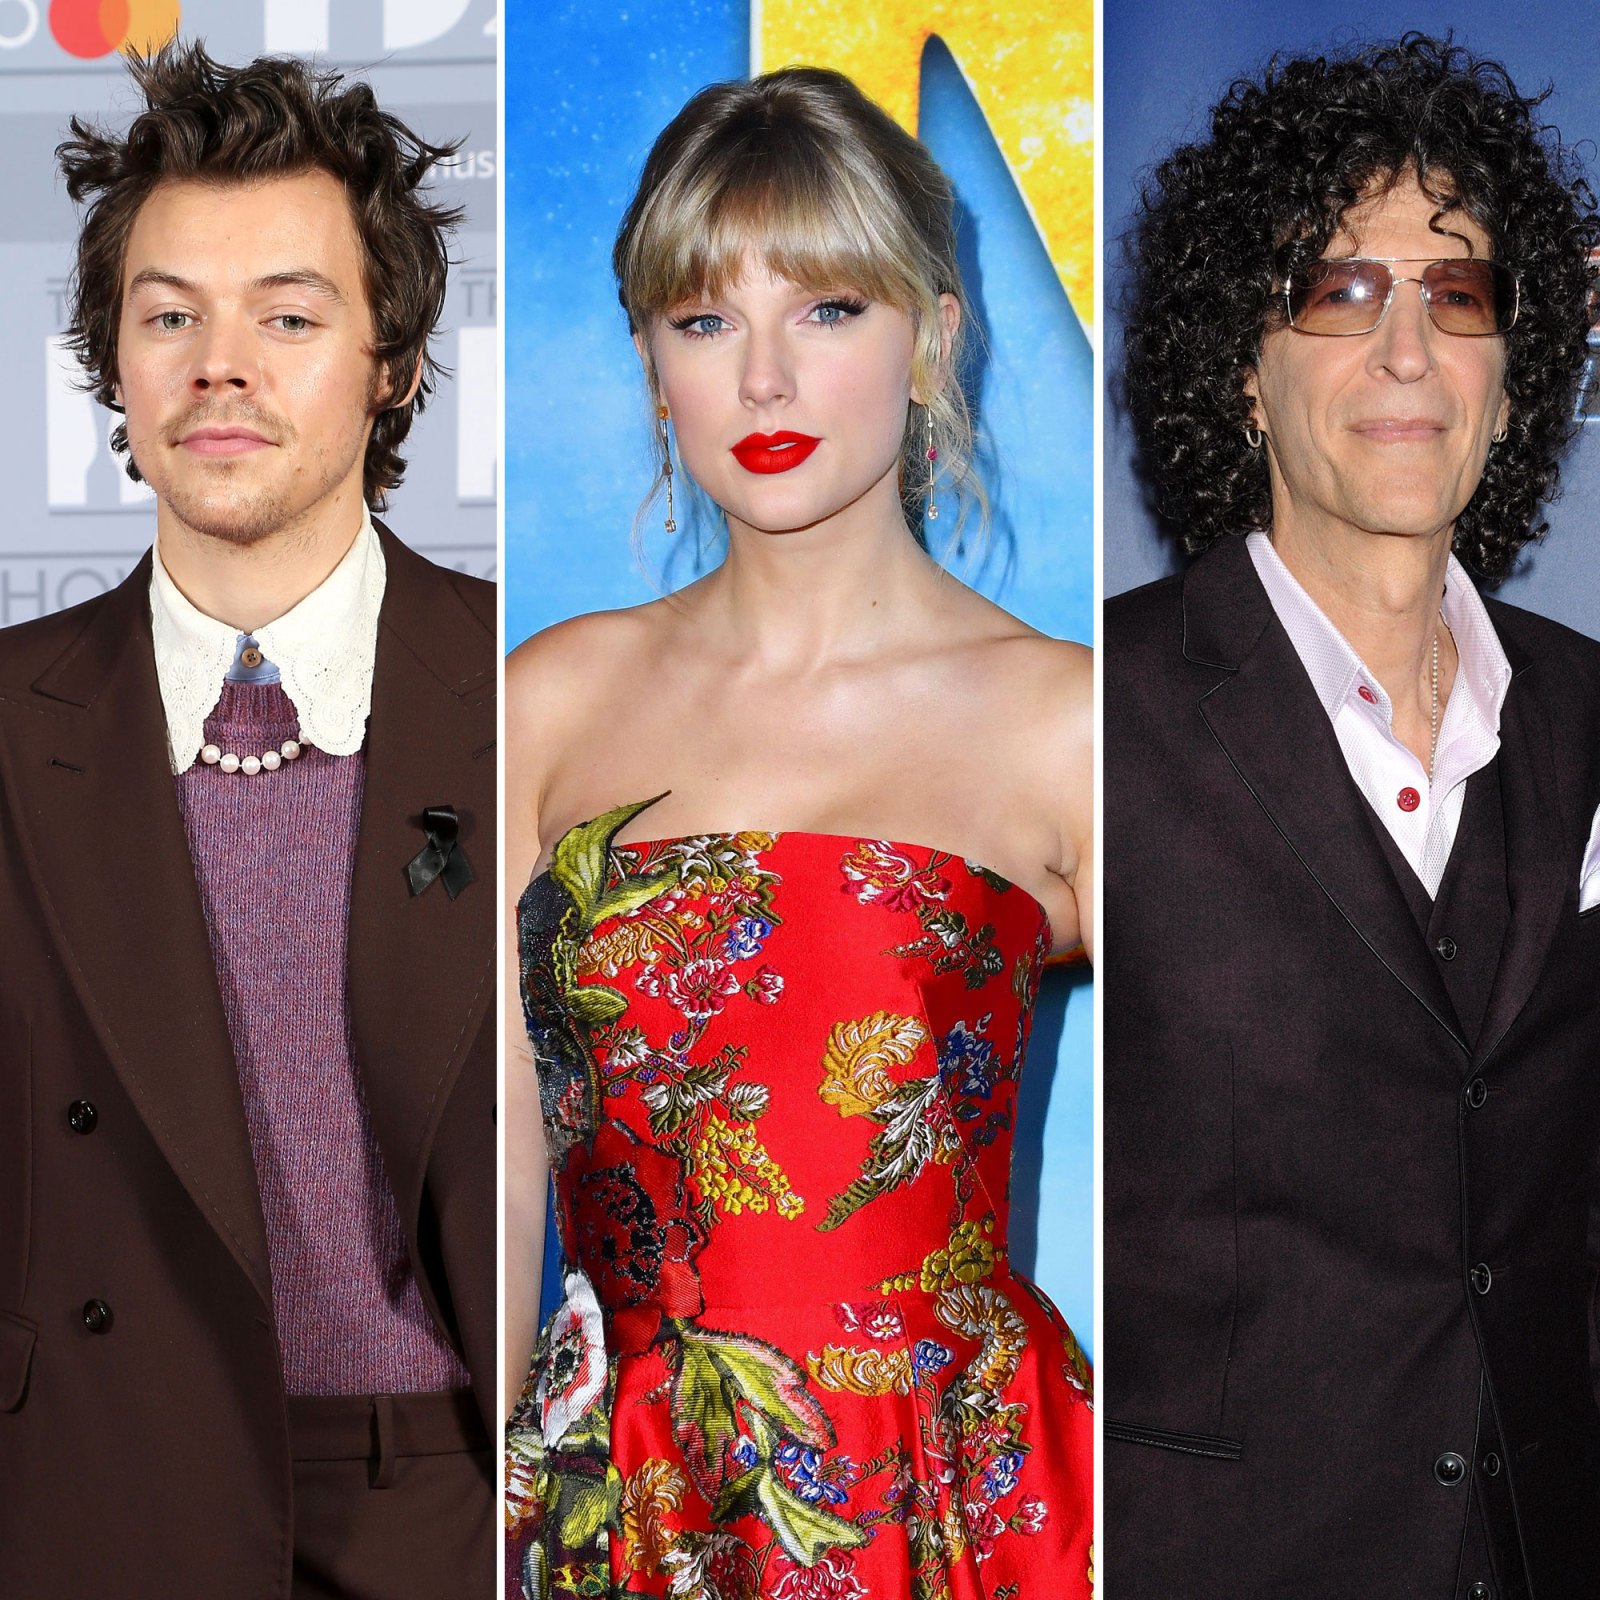 Harry Styles Gets Real About Taylor Swift, Therapy, More With Howard Stern